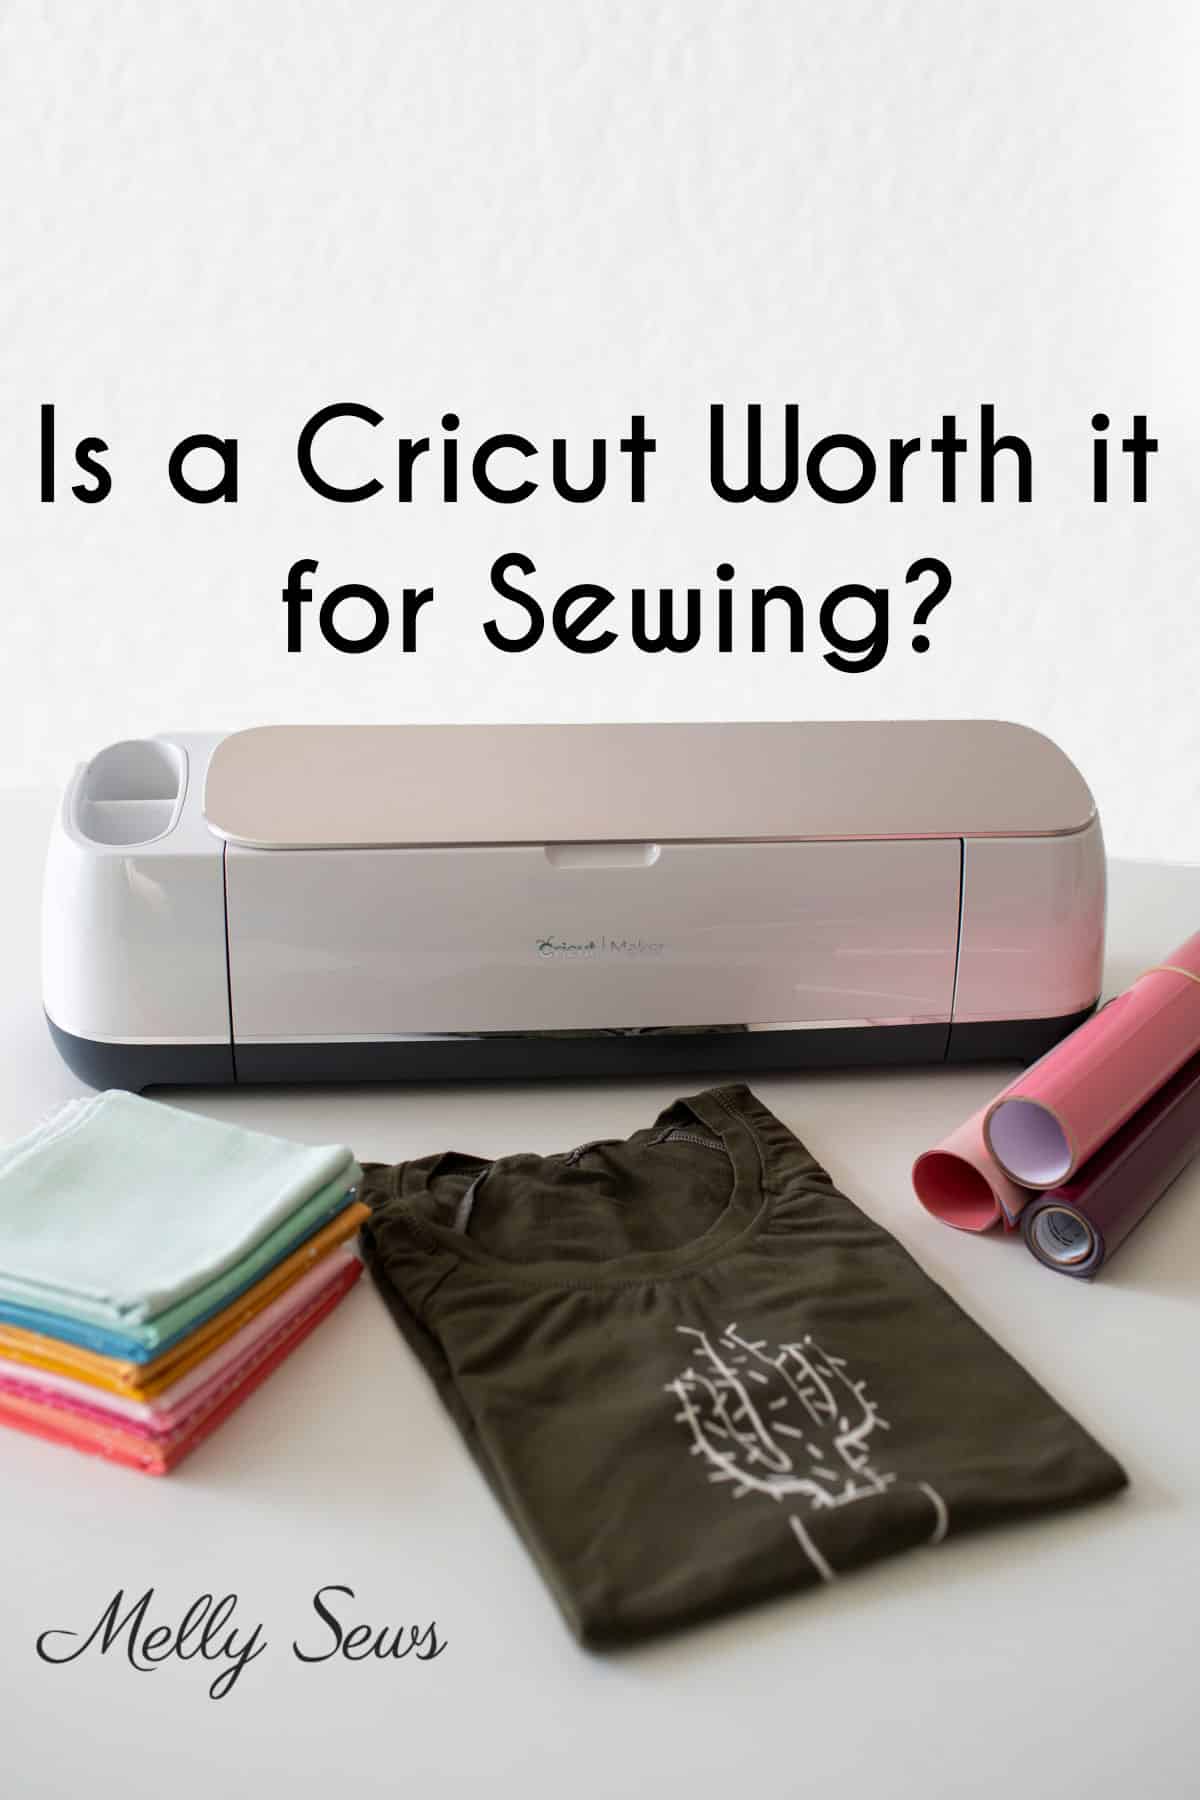 Cricut How to Handle It: The Time-saving Guide to Understand Cricut  Materials, Tools & Accessories and Use Them Properly 